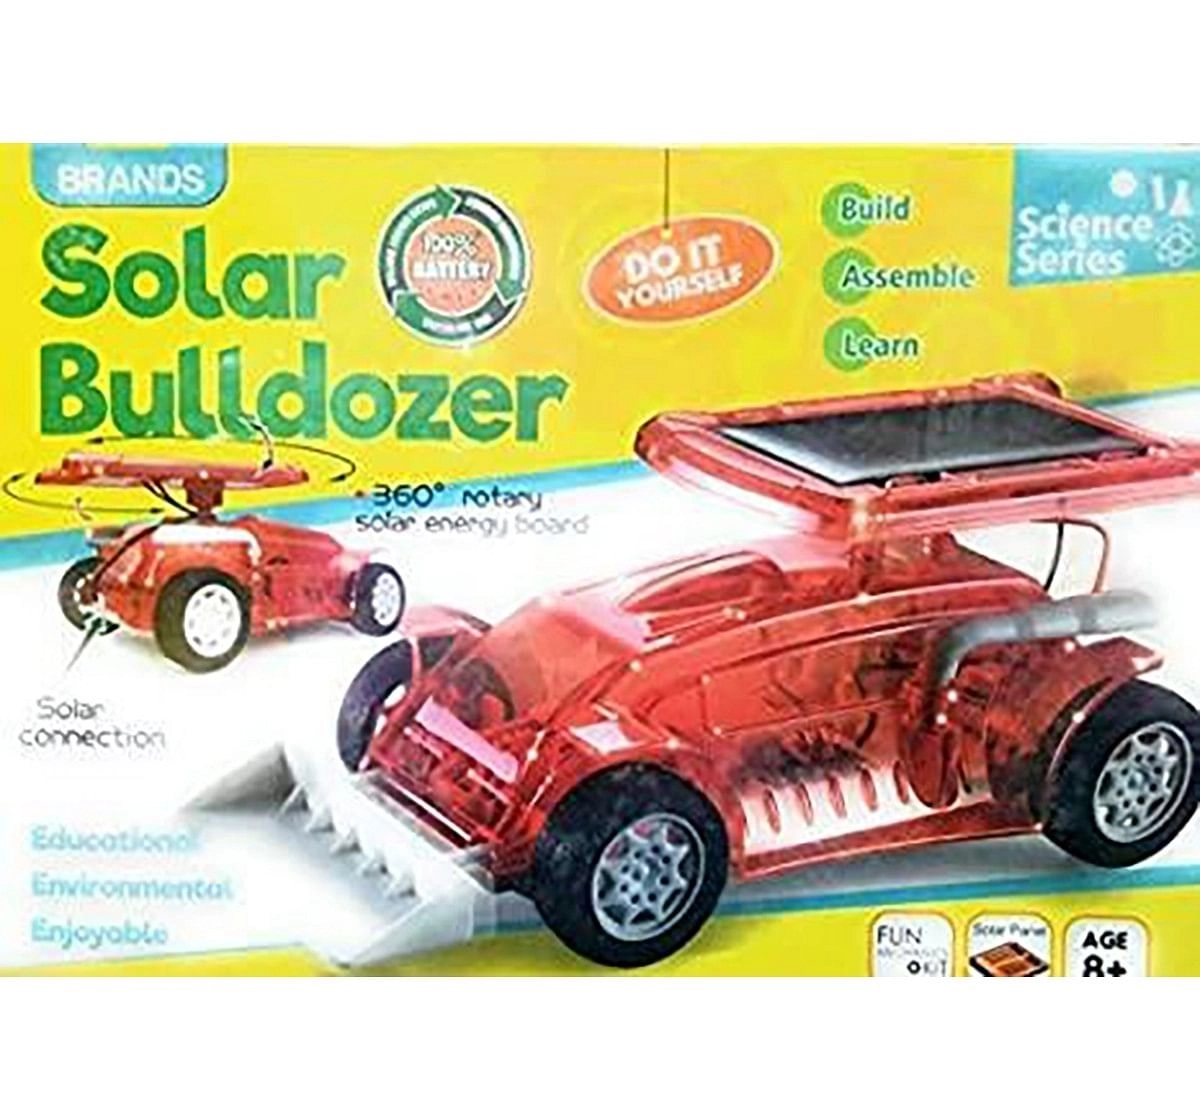 Play Craft Solar Powered Bulldozer Science Kits for Kids age 8Y+ 